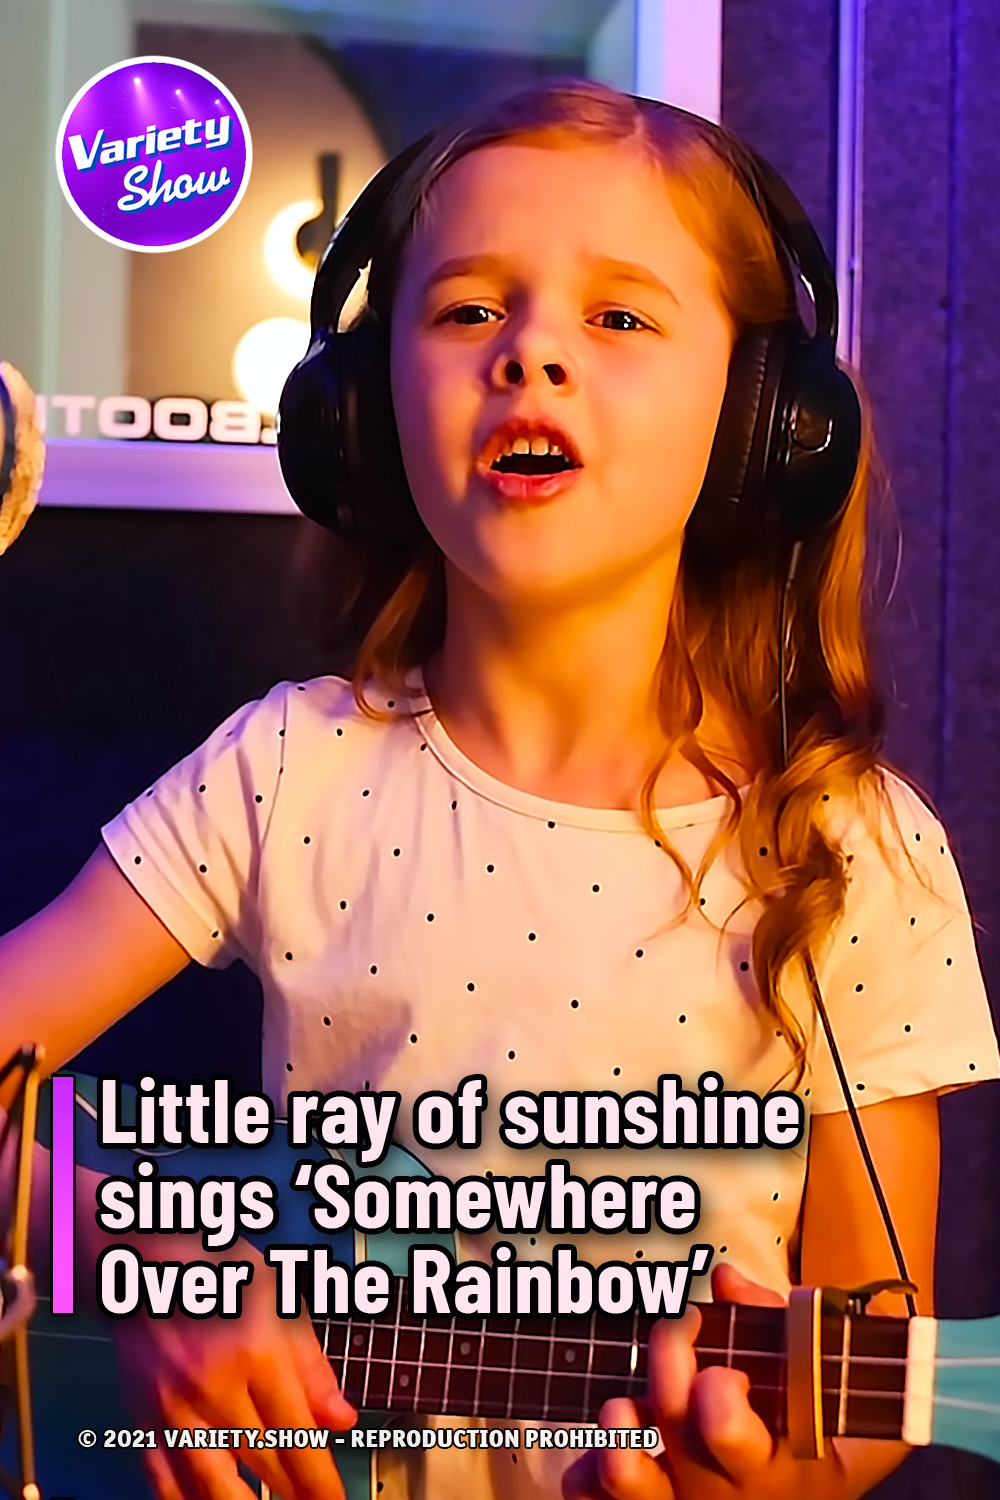 Little ray of sunshine sings ‘Somewhere Over The Rainbow’